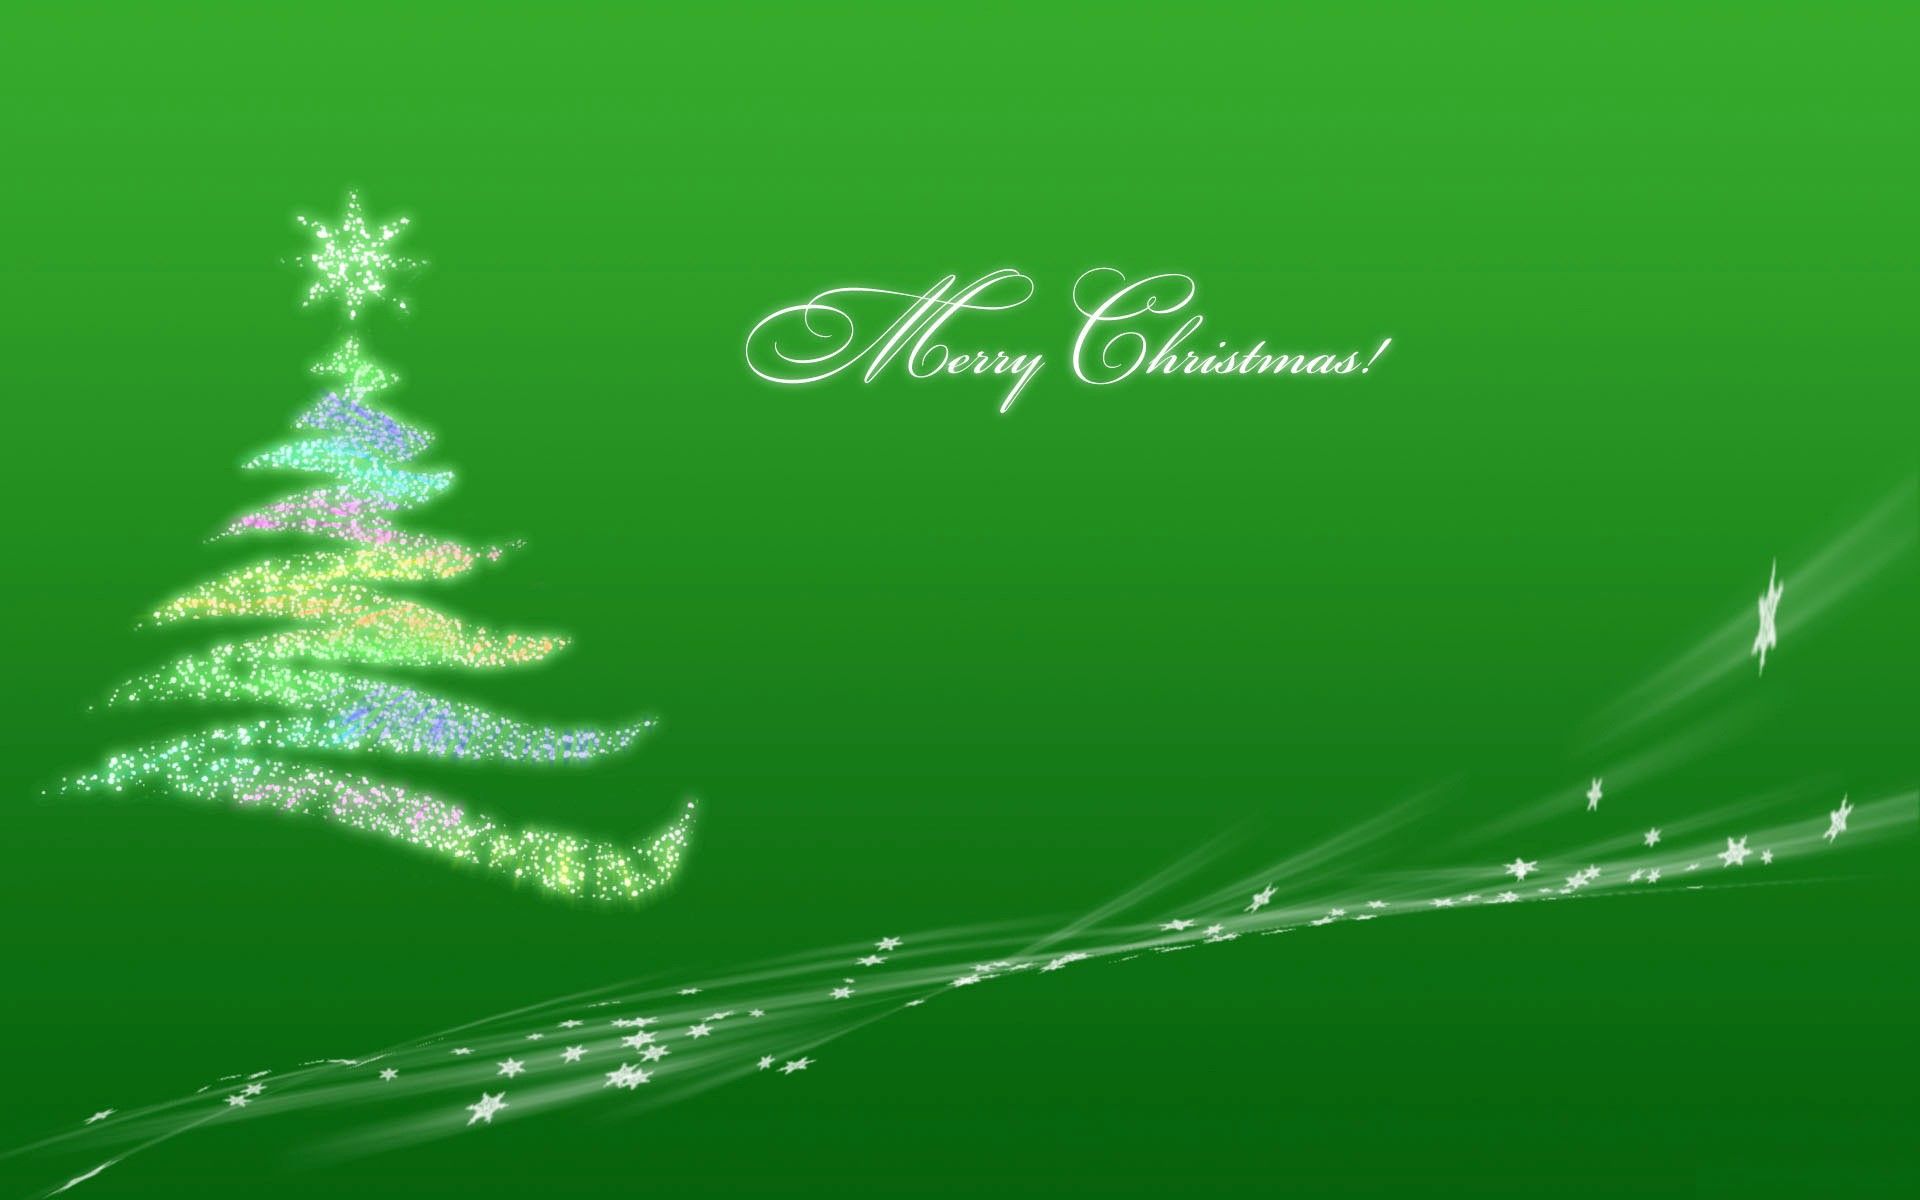 Merry Christmas tree free download wallpaper 2015 | Wallpapers ...